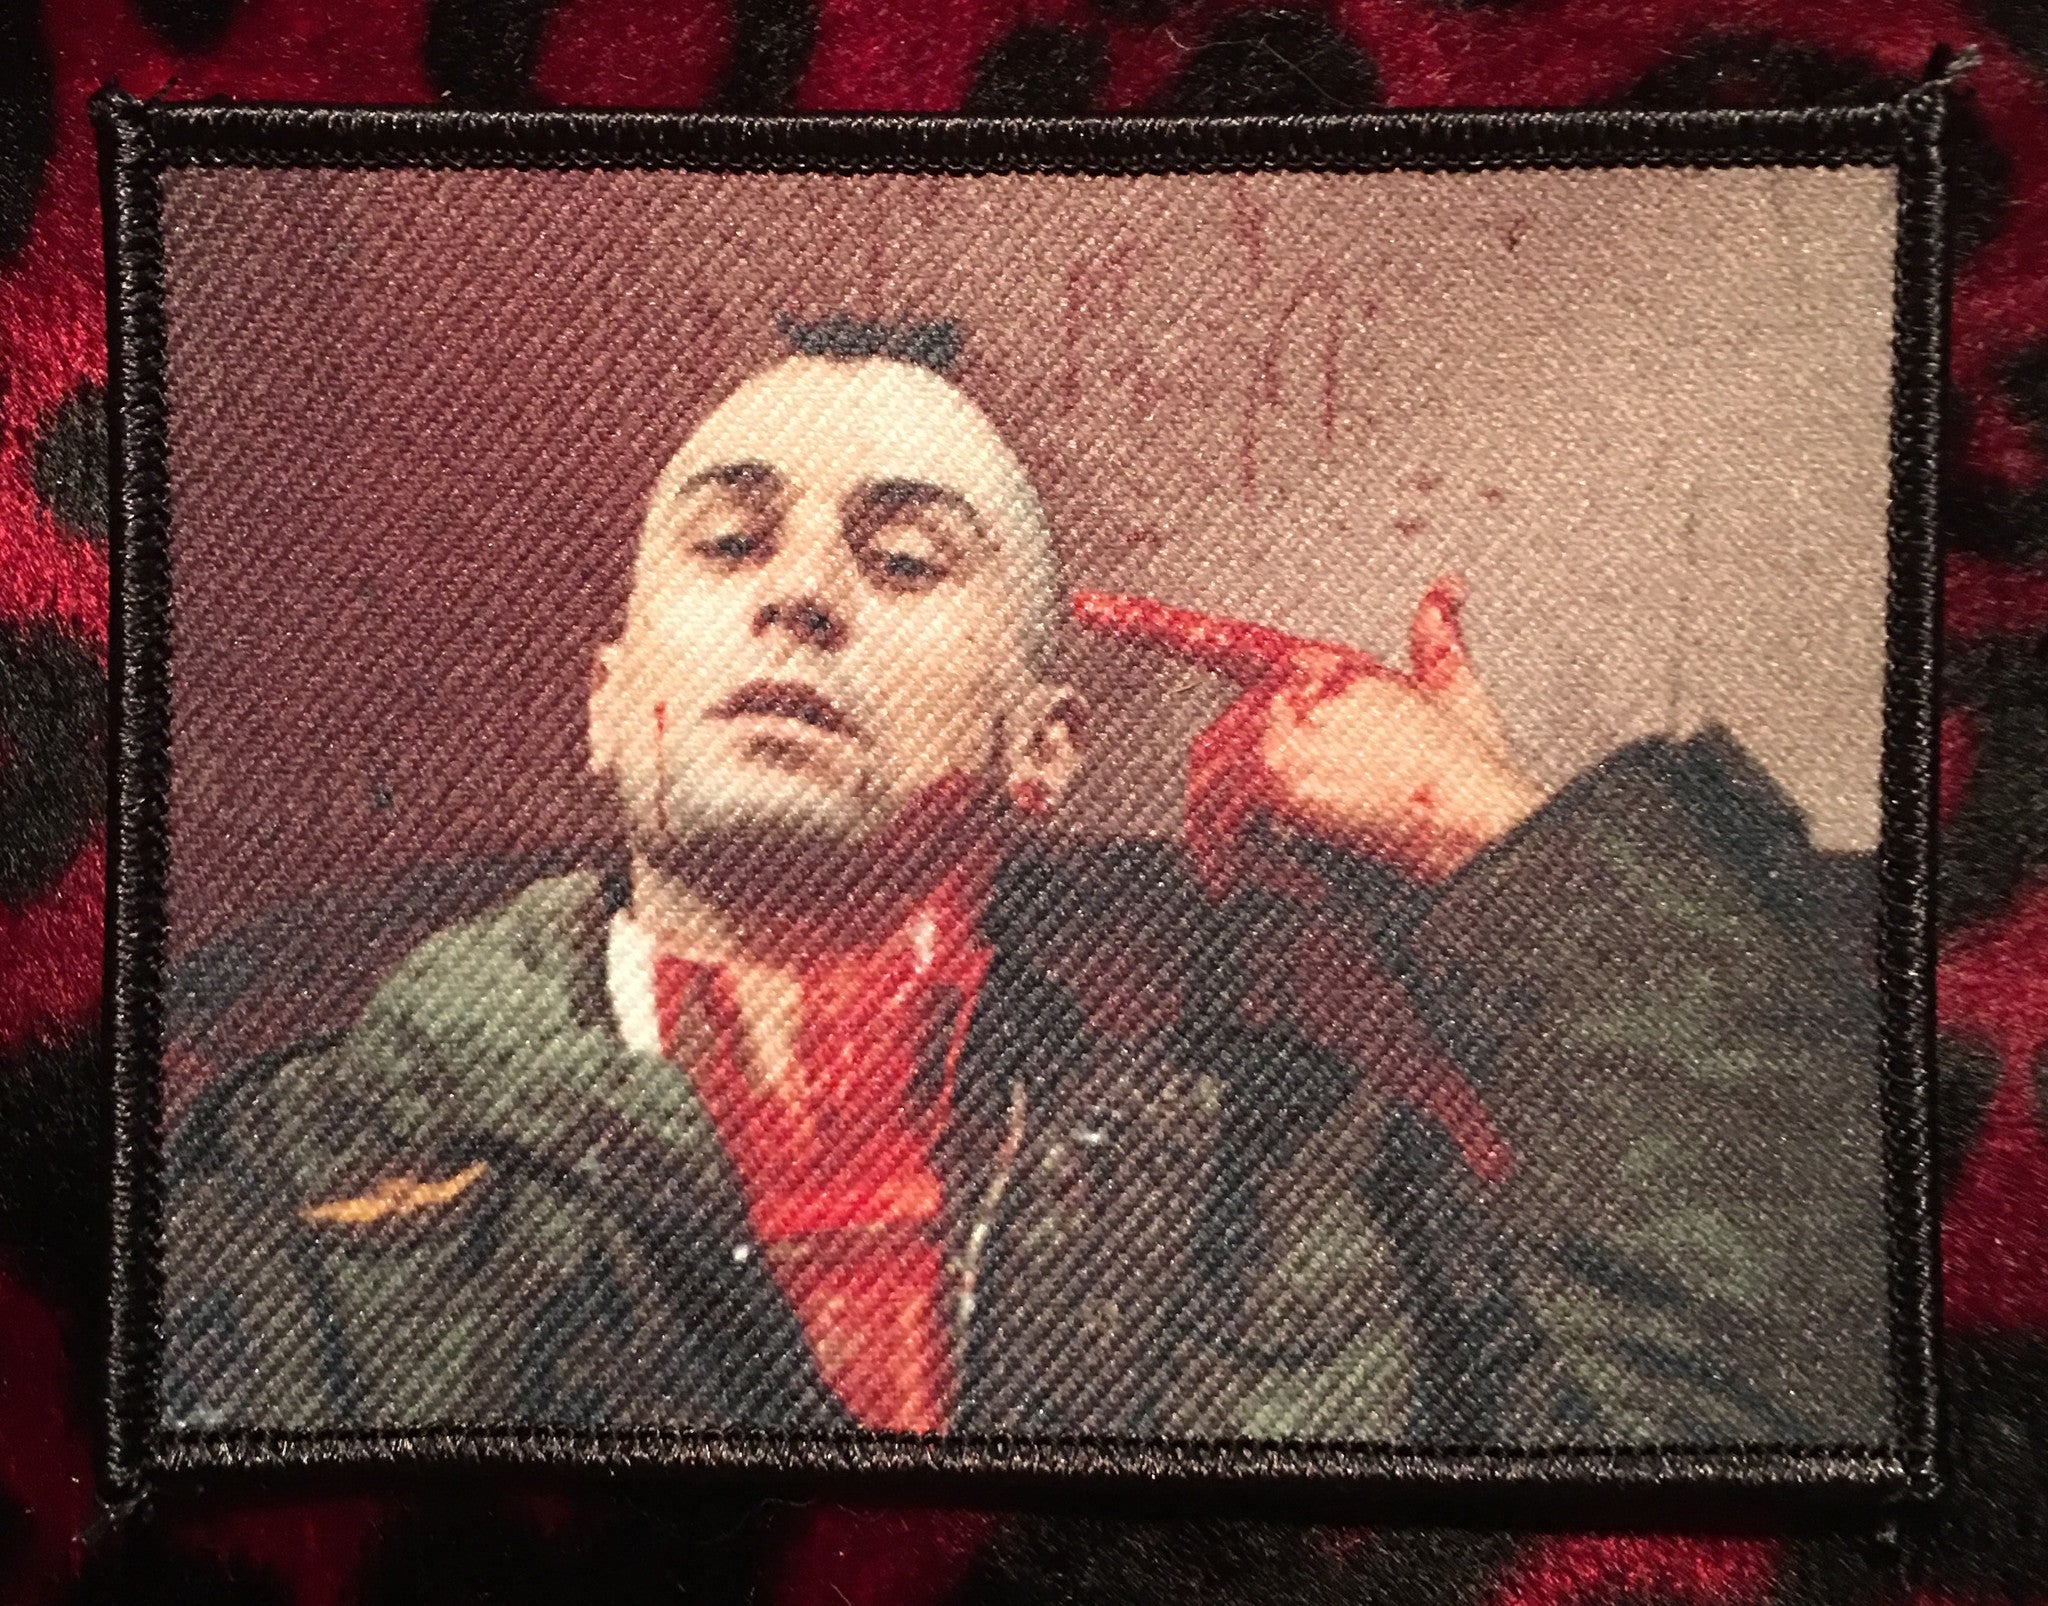 Taxi Driver Patch